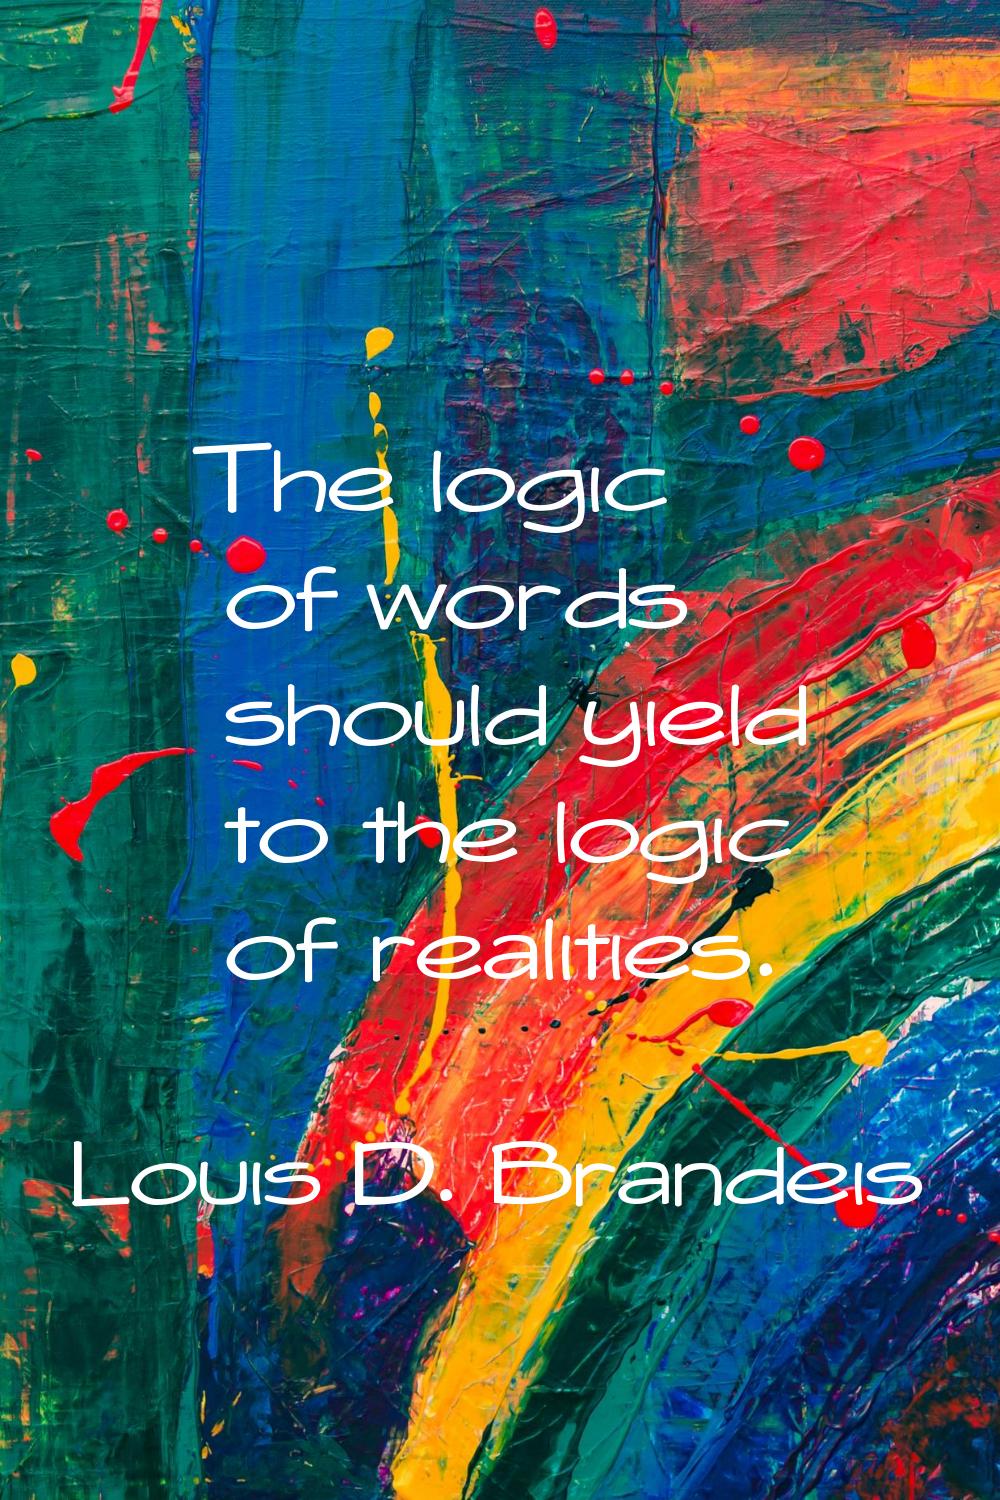 The logic of words should yield to the logic of realities.